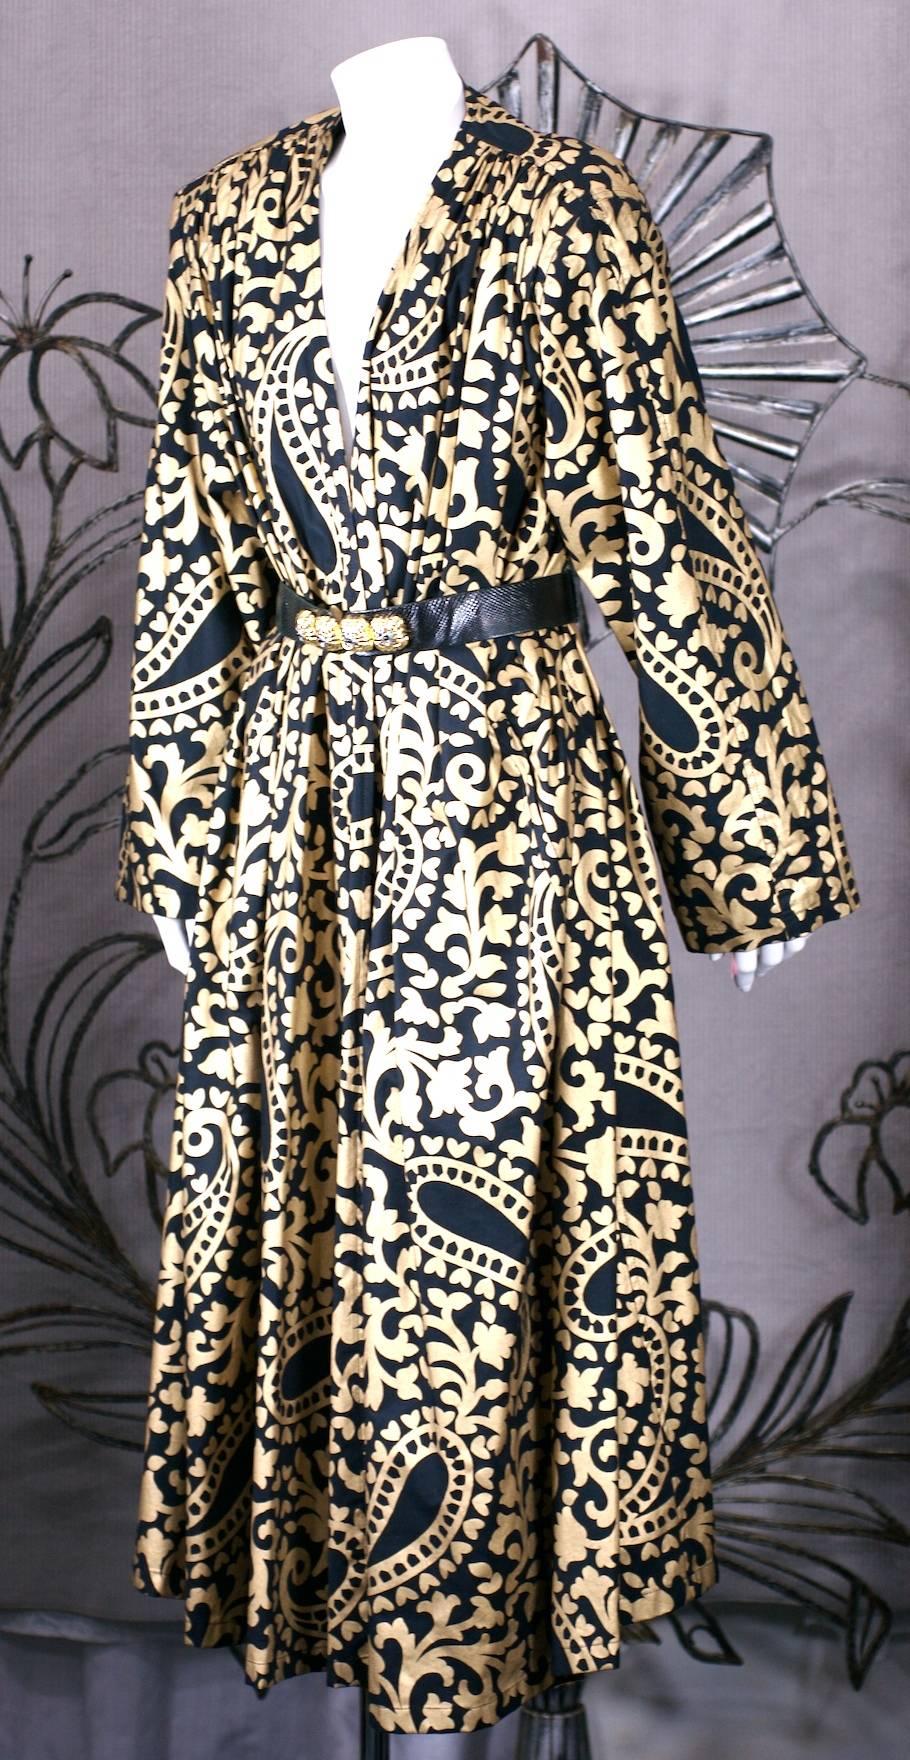 Bold Italian Gold and Black Paisley Print Coat in glazed cotton with full cut sleeves. Styled as a fully cut swing coat falling from large shoulder pads with no closures. Requires belt (not included). 
Graphic 80's styling and presence. Fits a